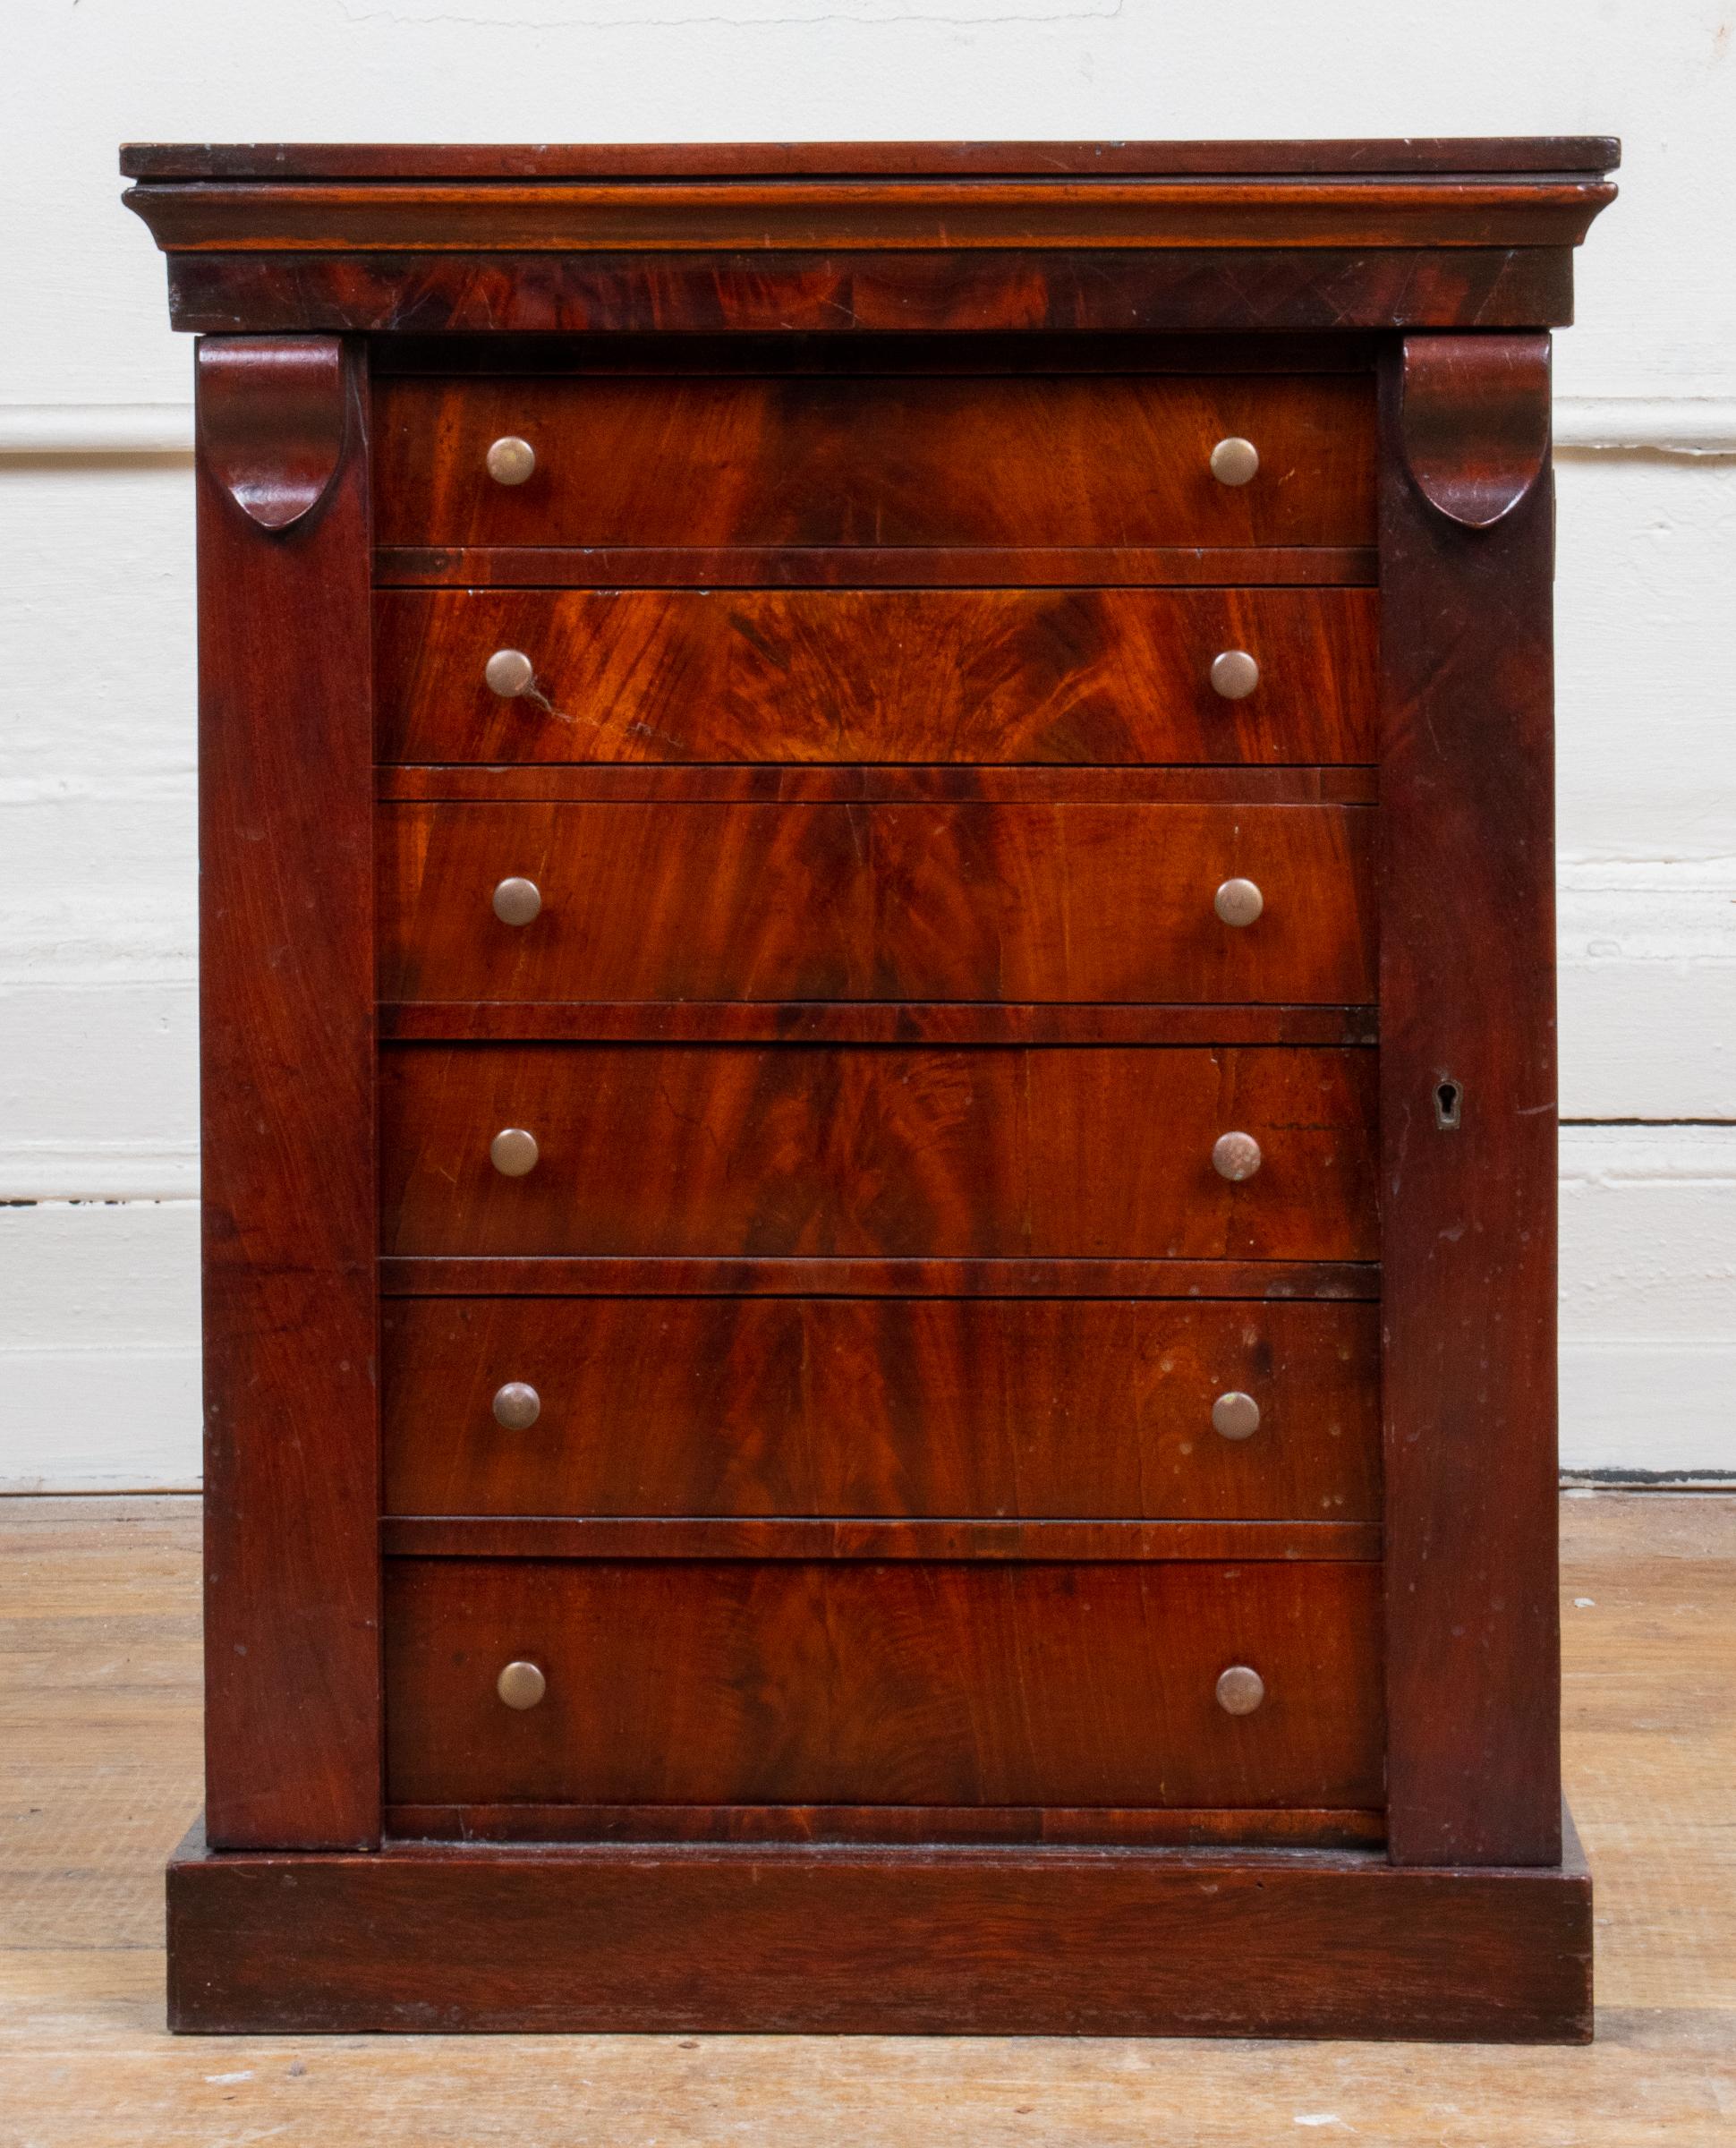 Empire style diminutive flame mahogany chest, with six drawers flanked by two shutter flaps. In great antique condition with age-appropriate wear. Measures: 19.75” H x 15.5” W x 10.75” D.